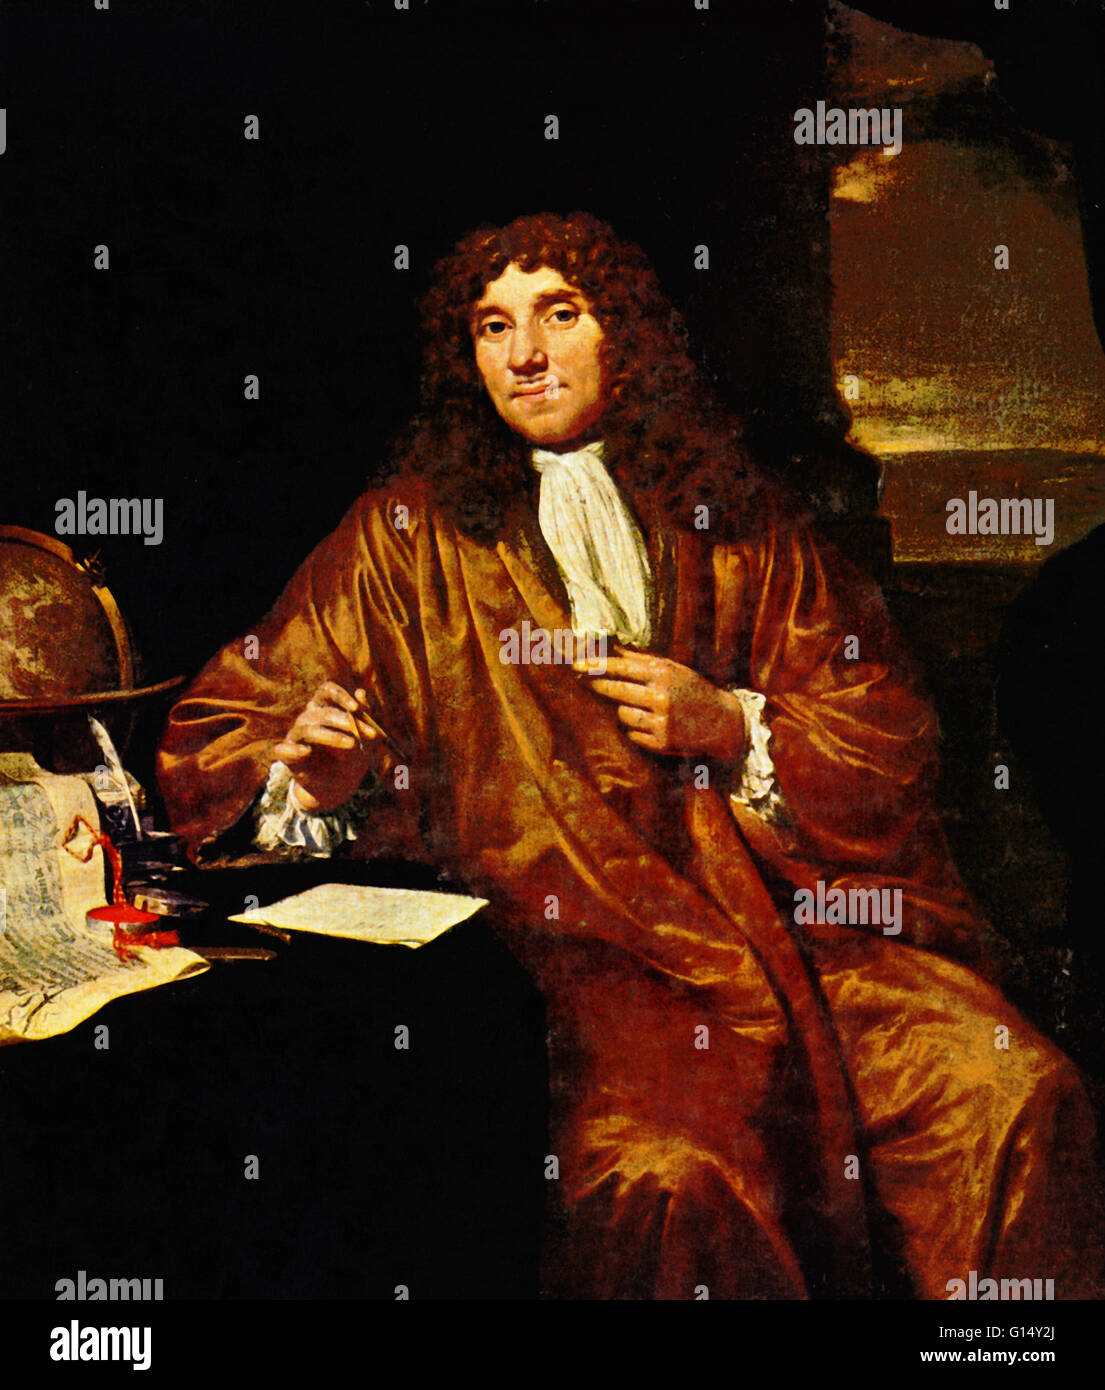 Antonie Philips van Leeuwenhoek (1632-1723) was a tradesman and scientist. He is known as "the Father of Microbiology", and considered be the first microbiologist. He is best known for his